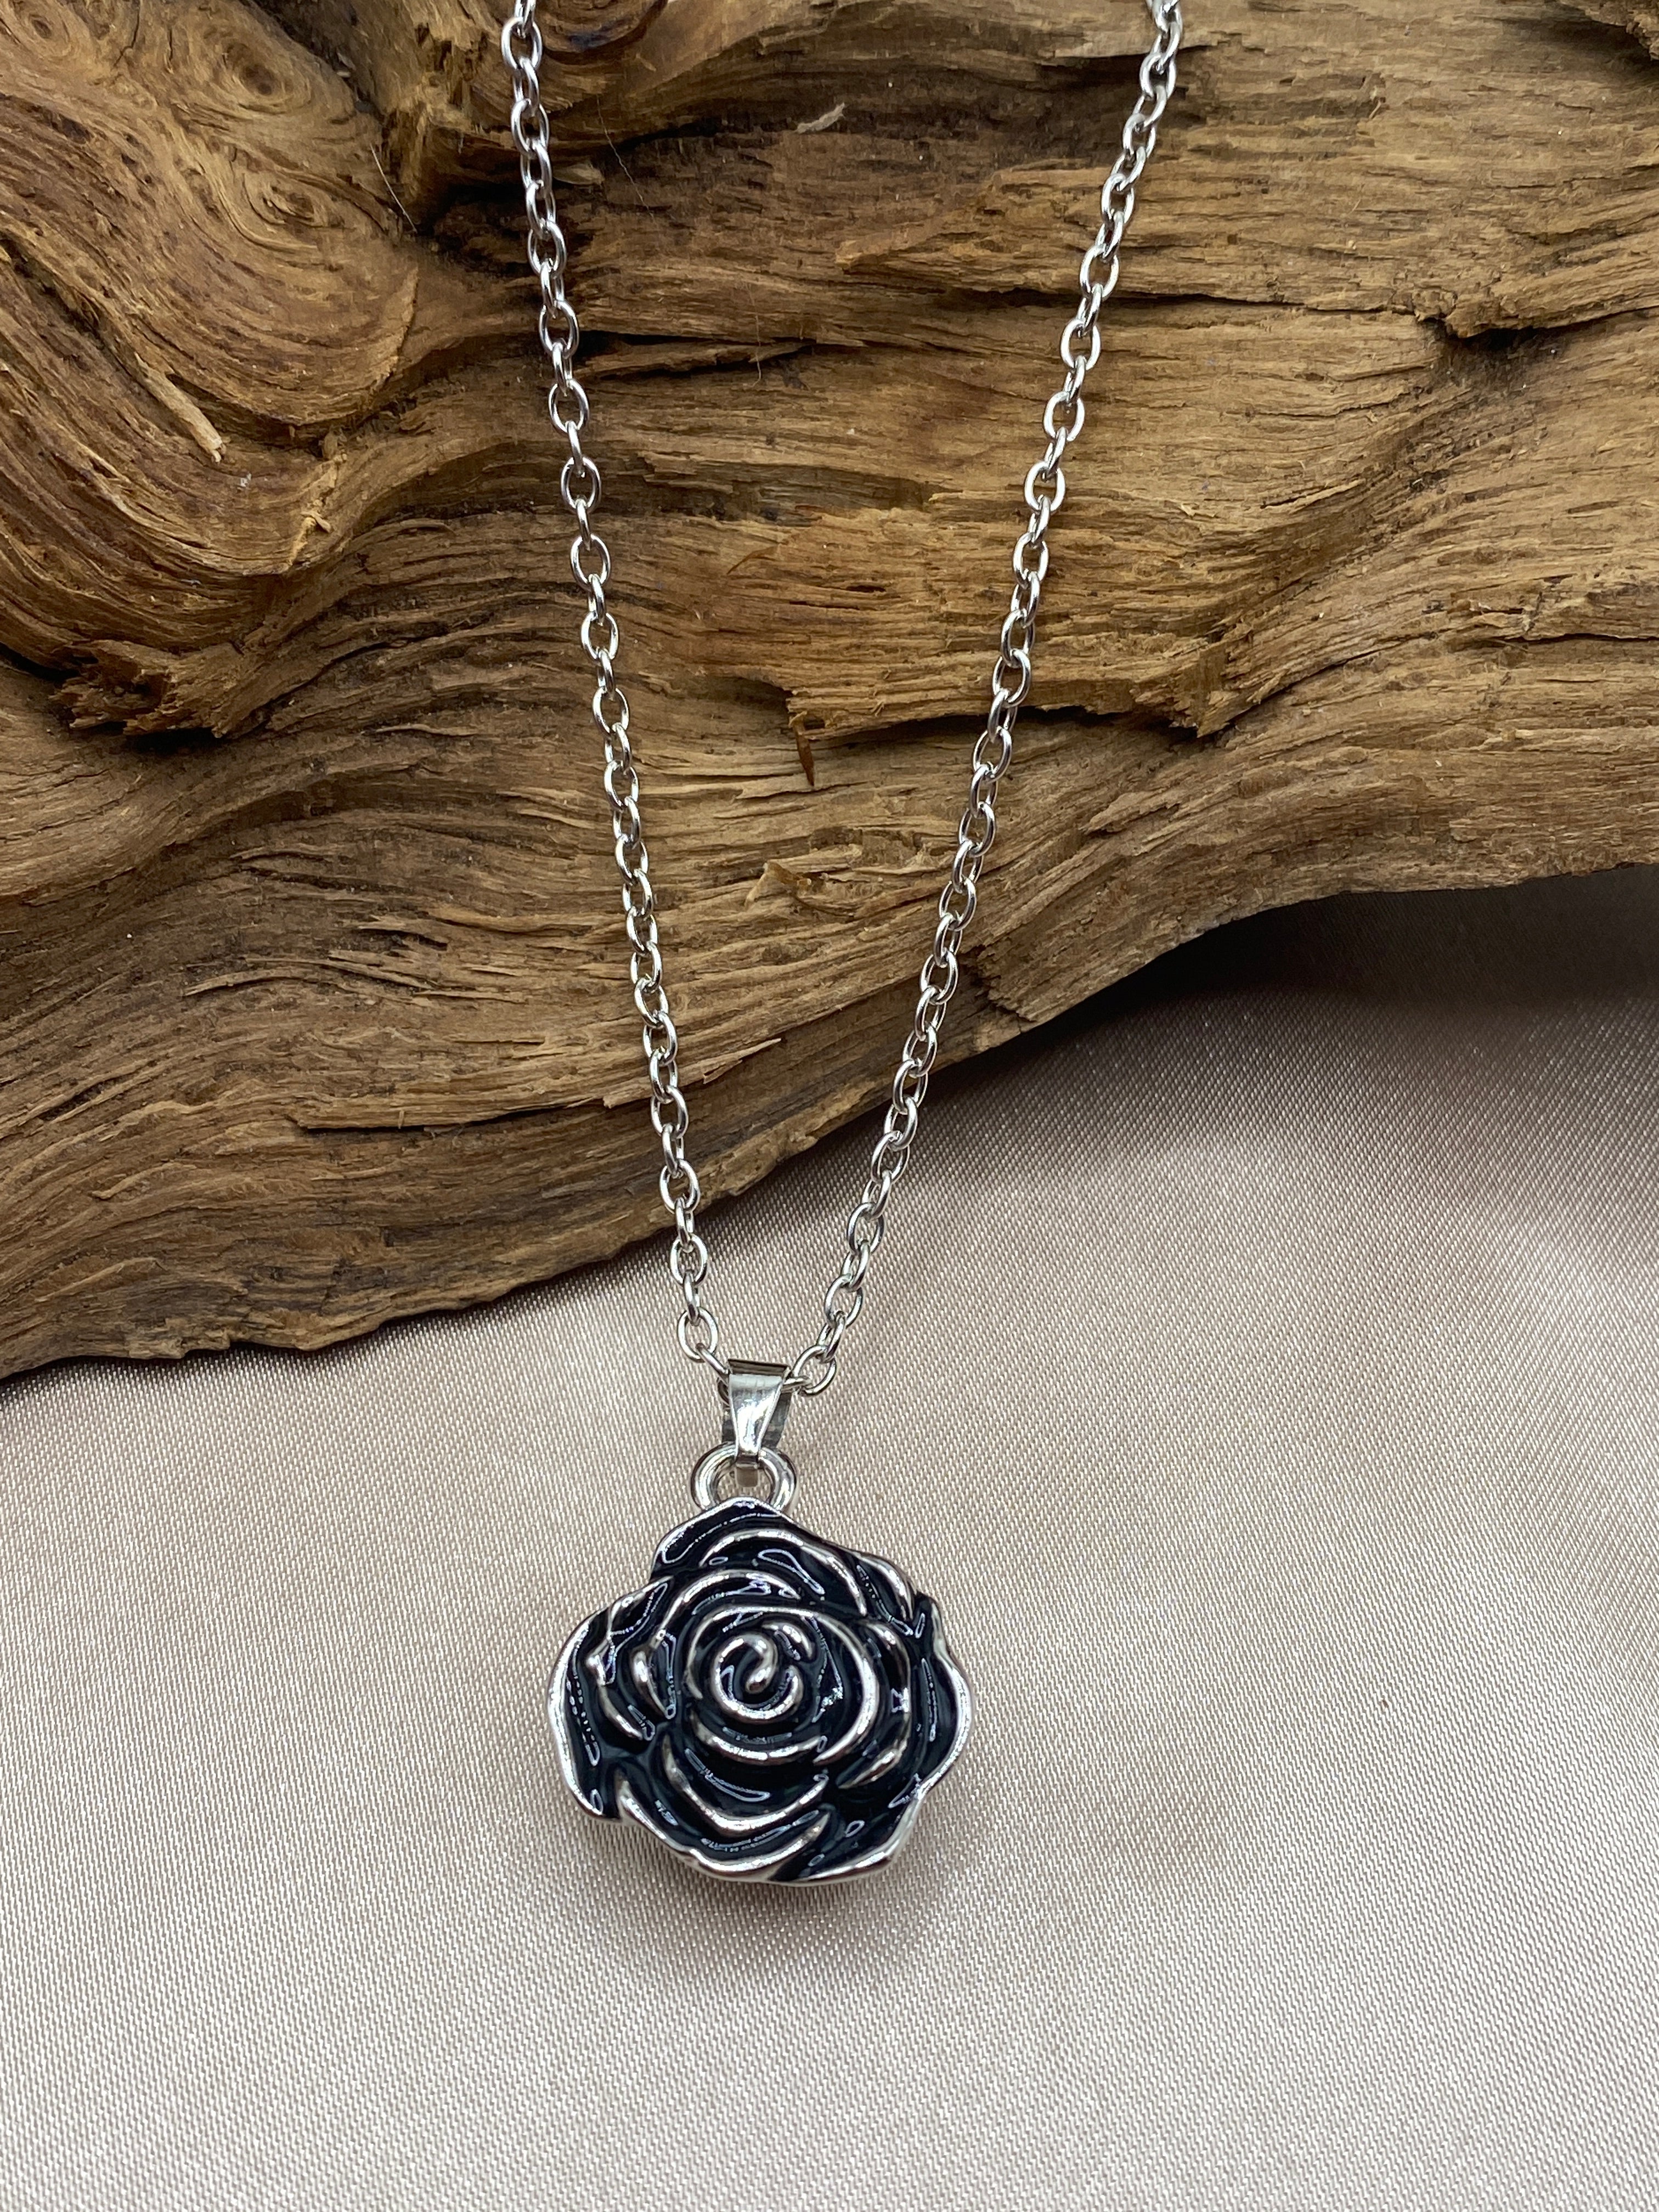 Rose Flower Cremation Urn Necklace - Stainless Steel Urn Jewelry